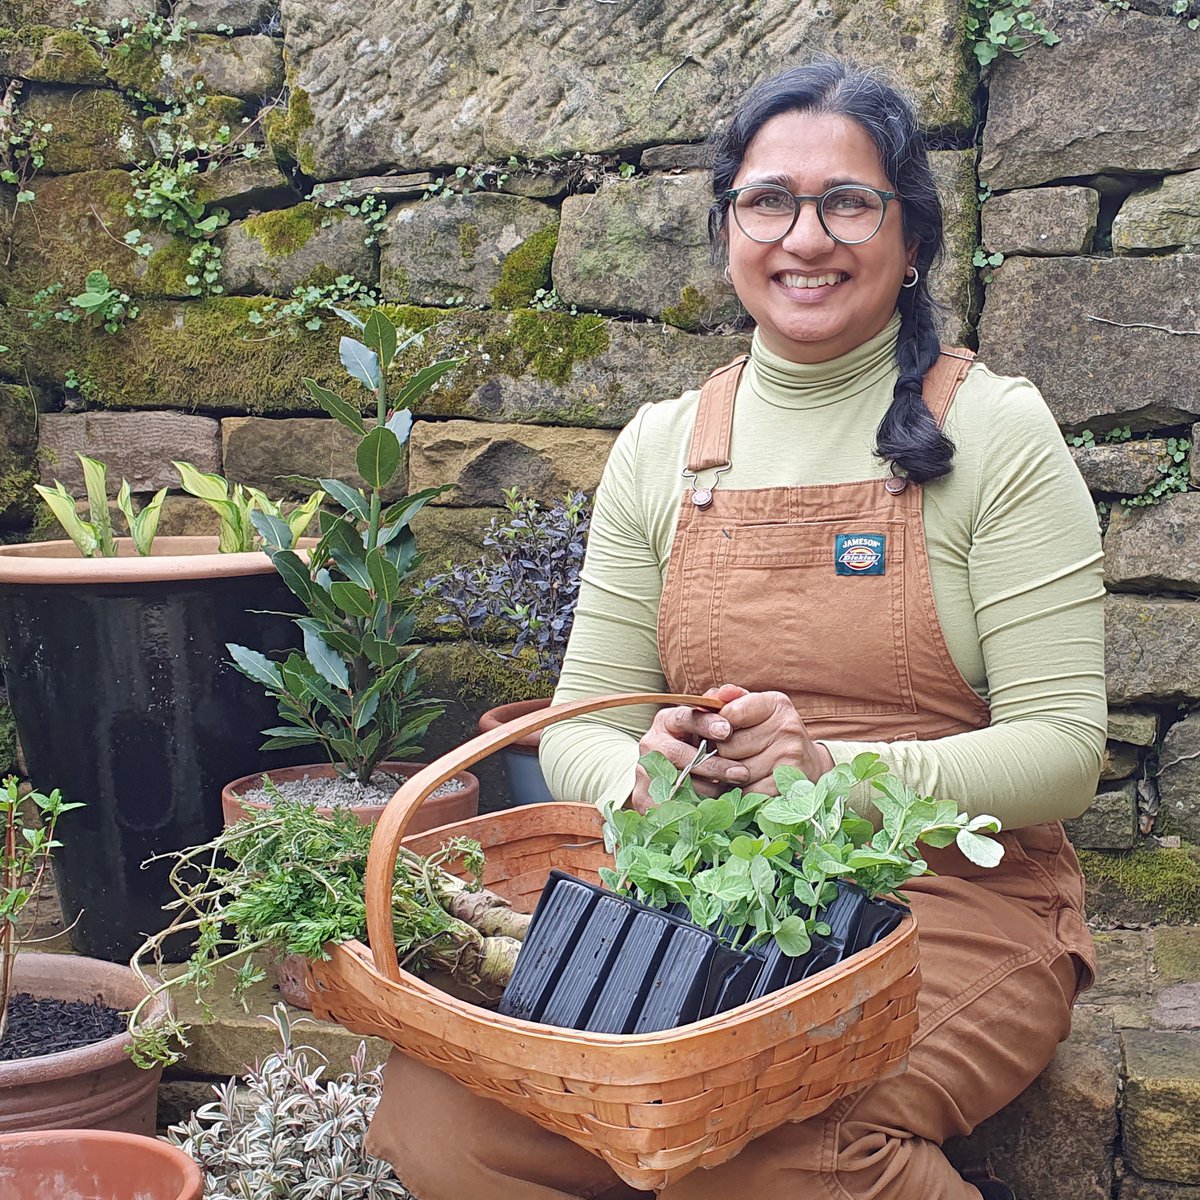 This week, we're catching up with @rekha181 in the Peak District as she takes stock of her new garden. And, as always, she's got a few experiments on the go! Find out more this Friday at 8pm on @BBCTwo 🙂 🍅 🥦 #GardenersWorld #Gardening #GrowYourOwn #AllotmentLife